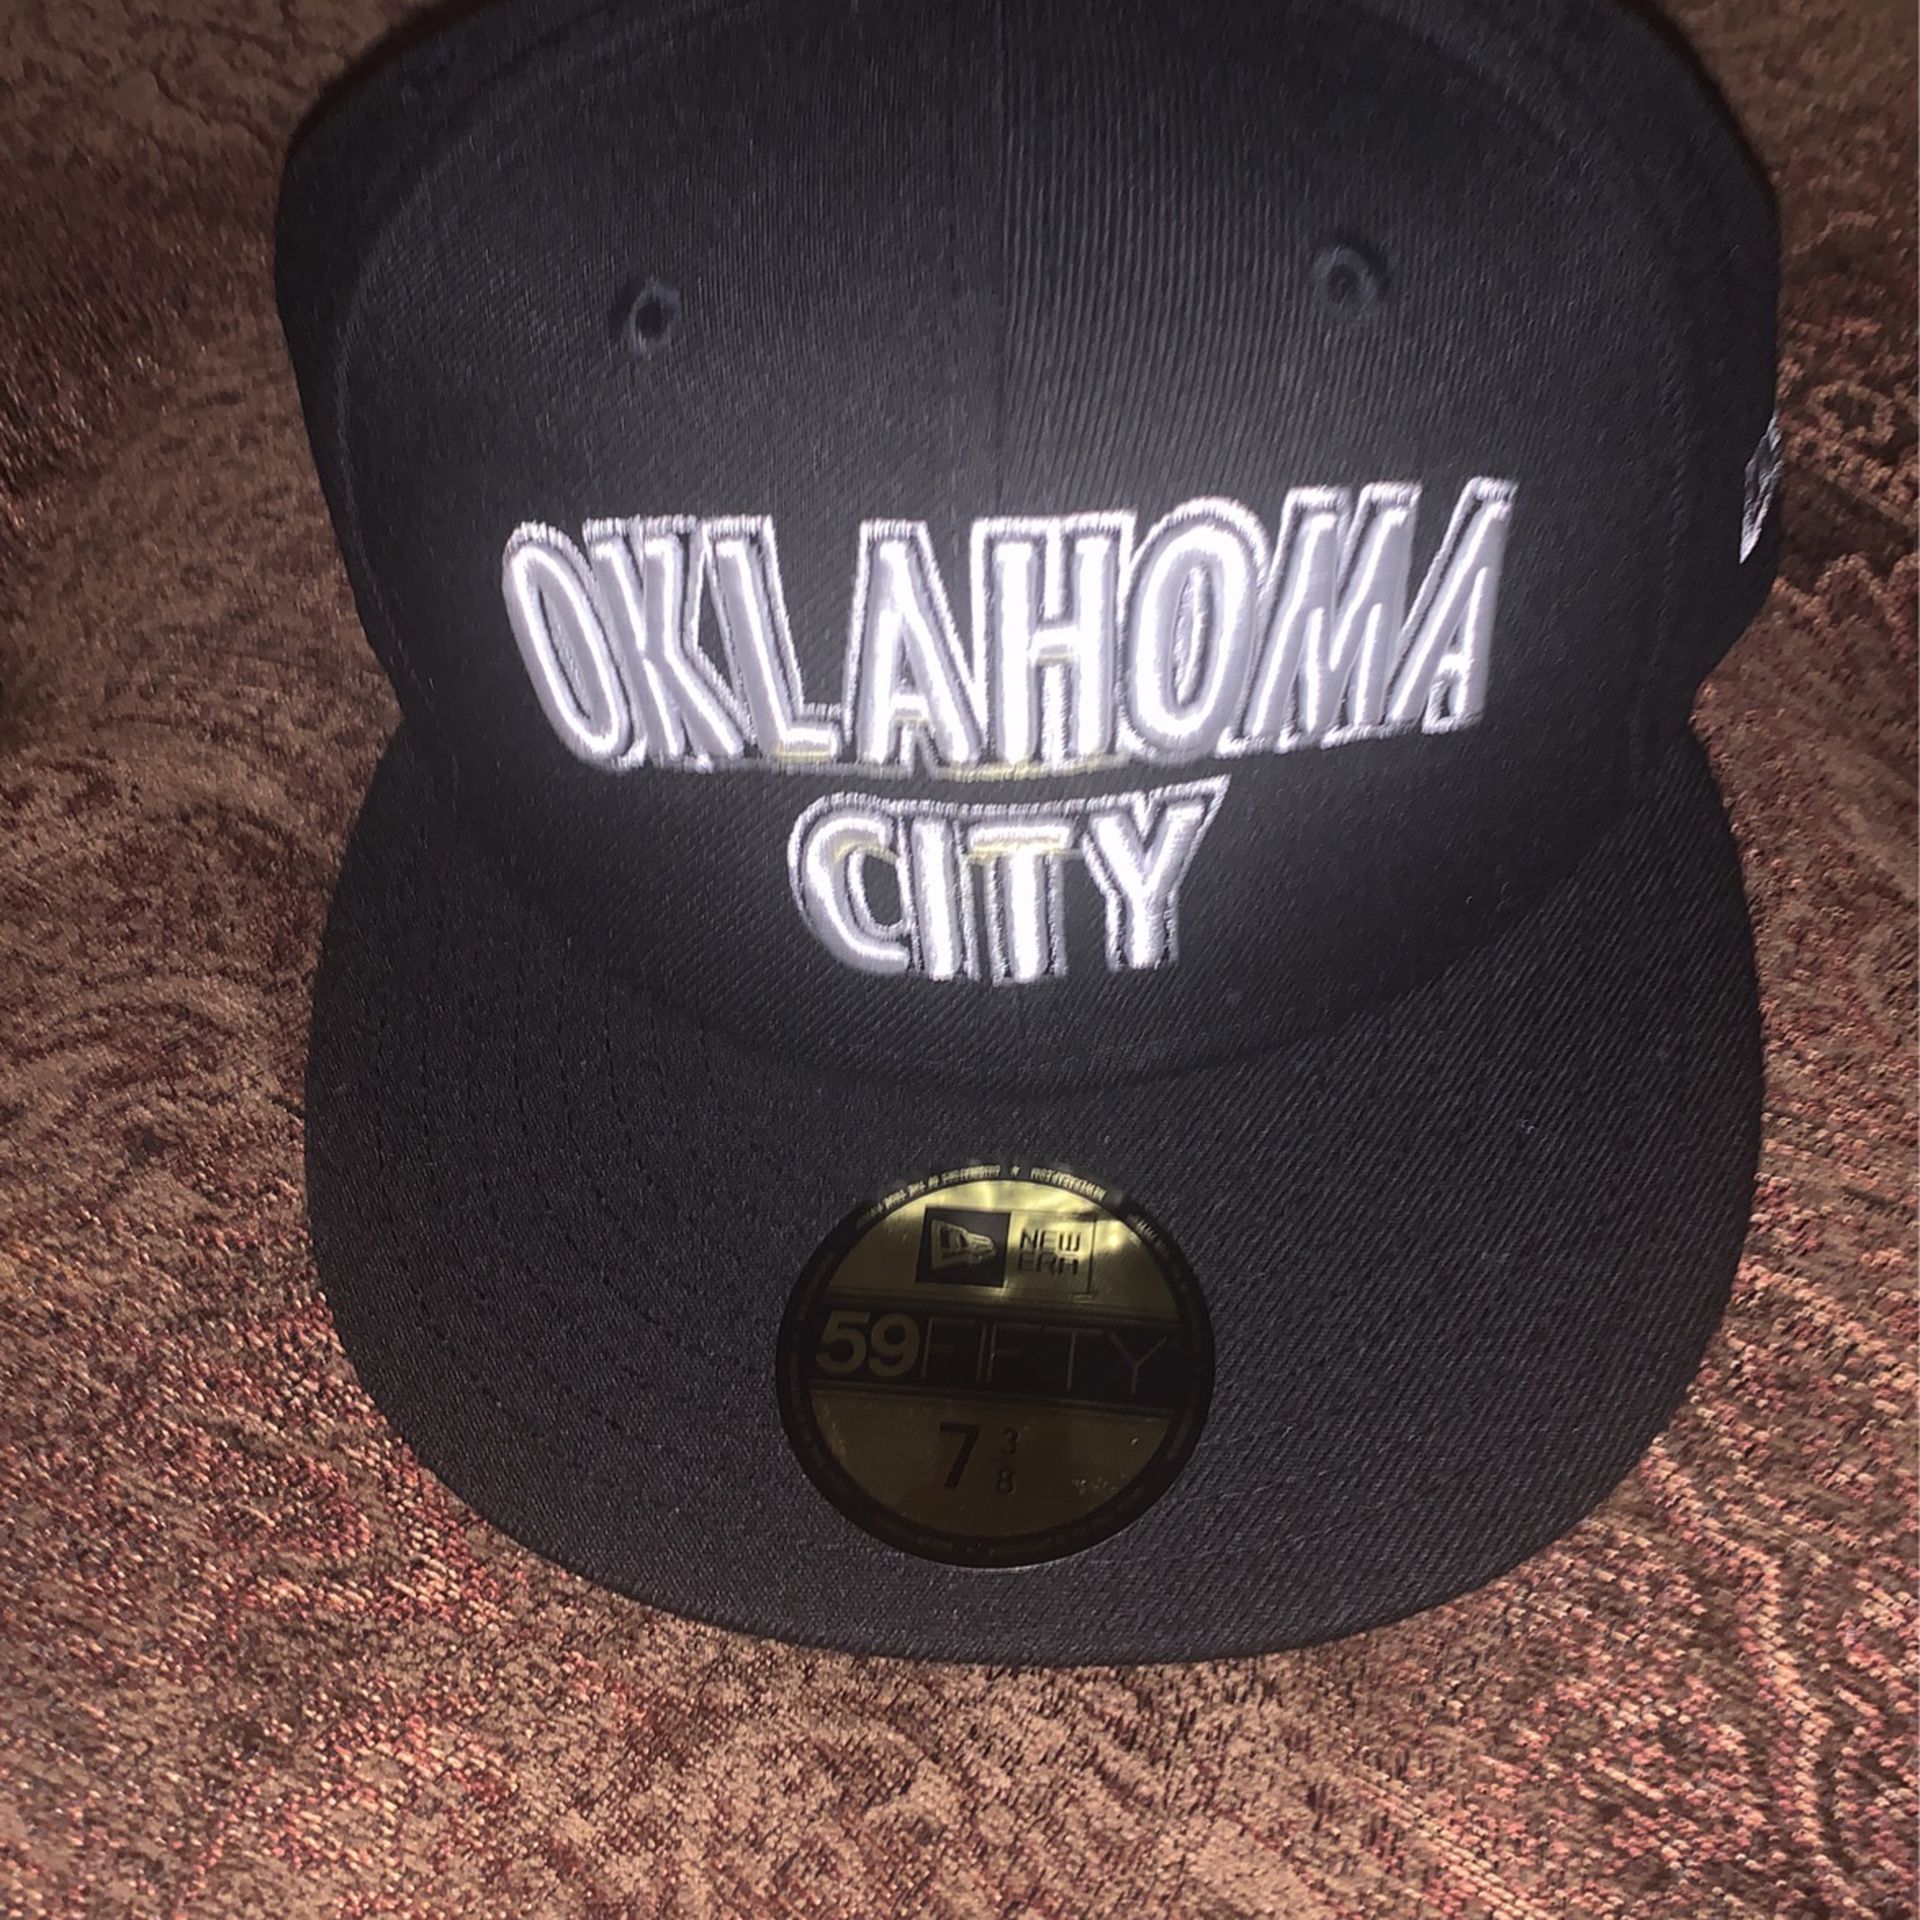 Okc Fitted 